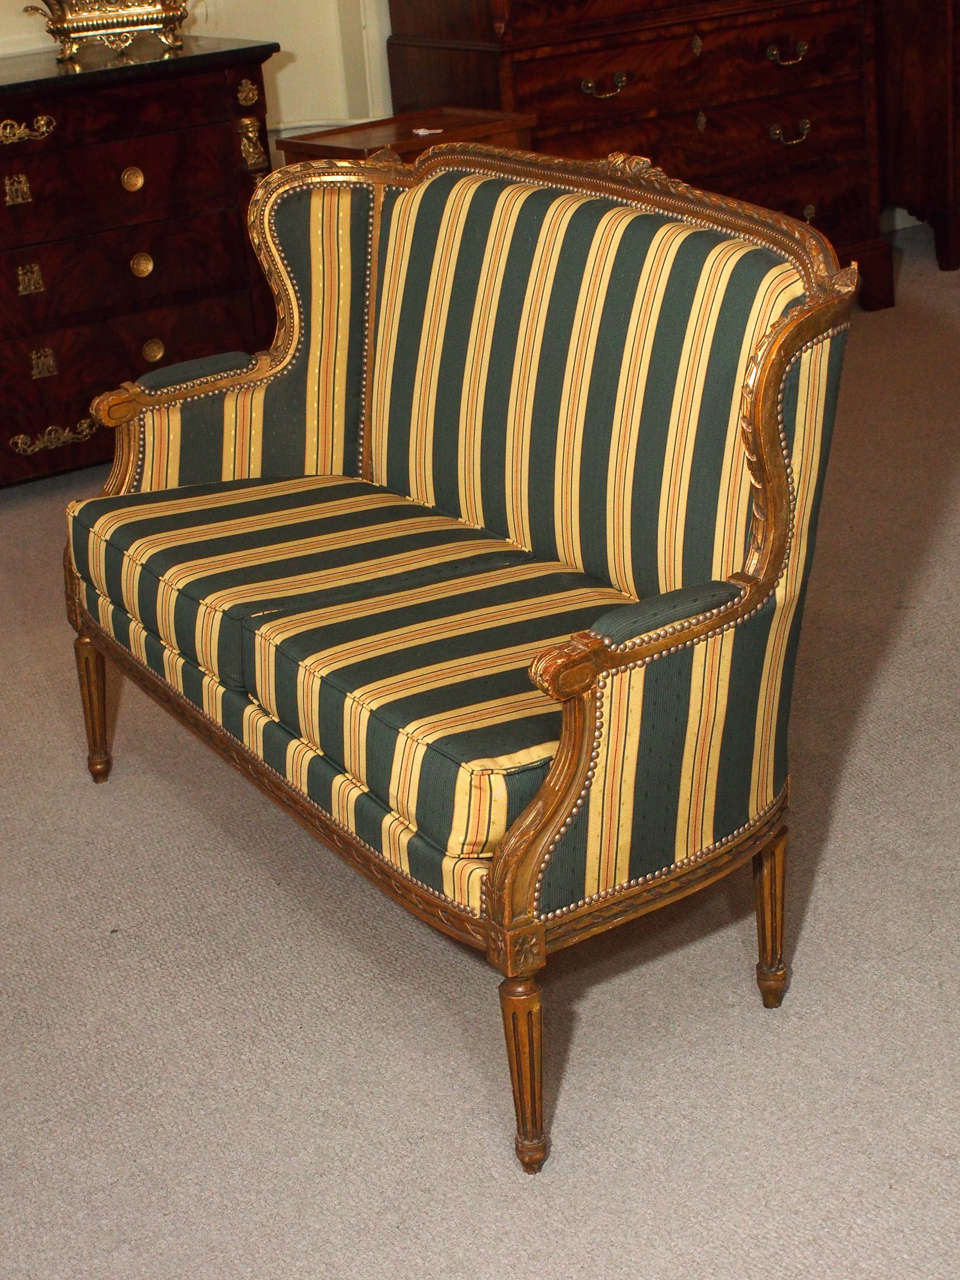 Antique French gold leaf upholstered Louis 16th style canape